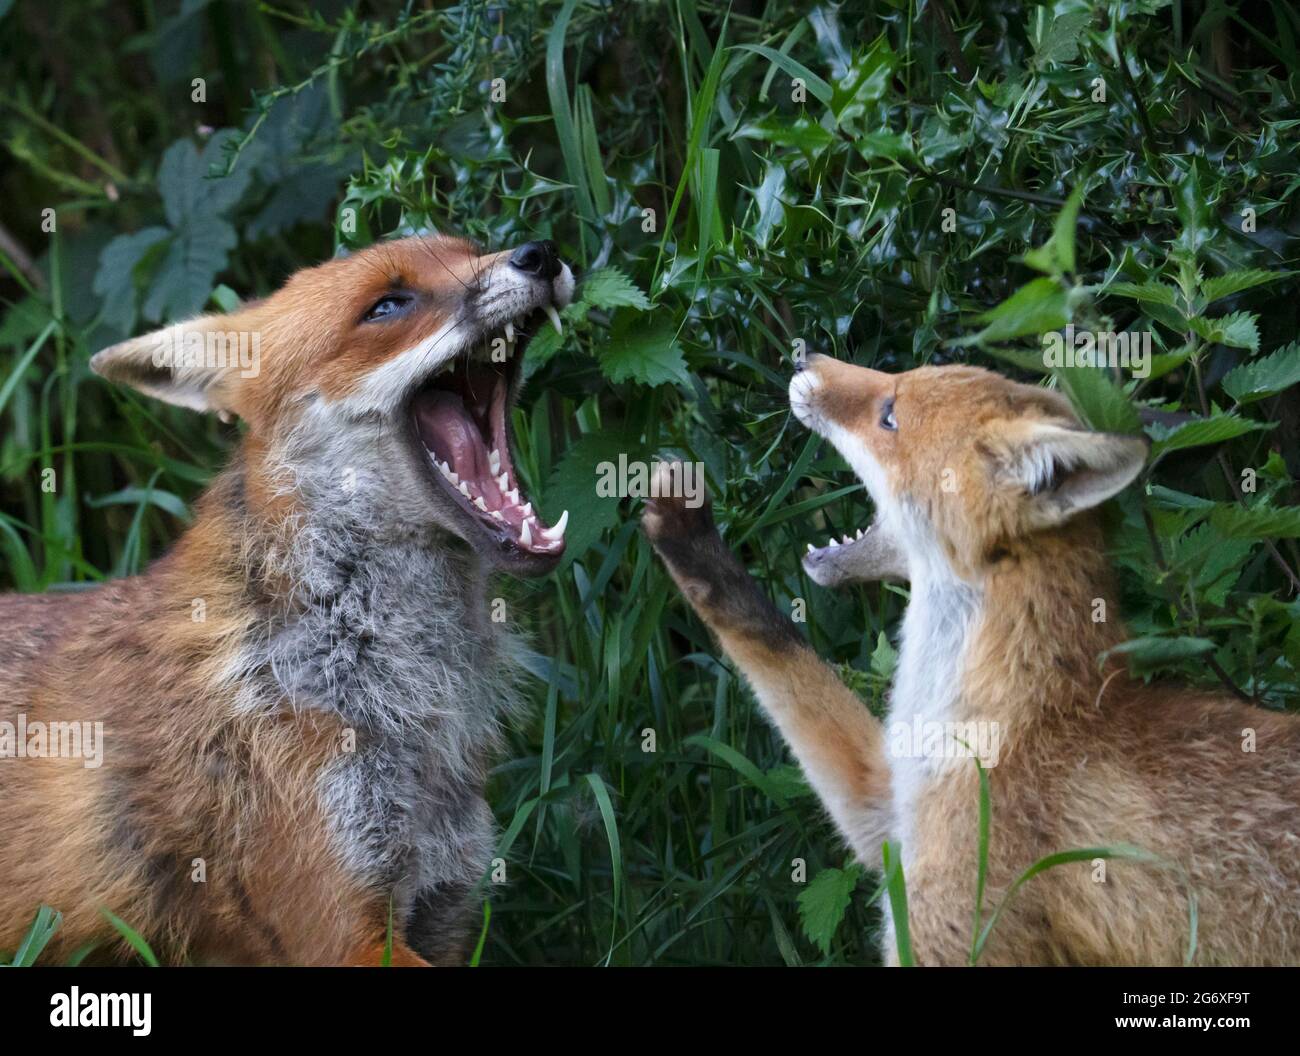 A Red Fox (Vulpes vulpes) cub engages in some restrained play fighting with an adult fox Stock Photo